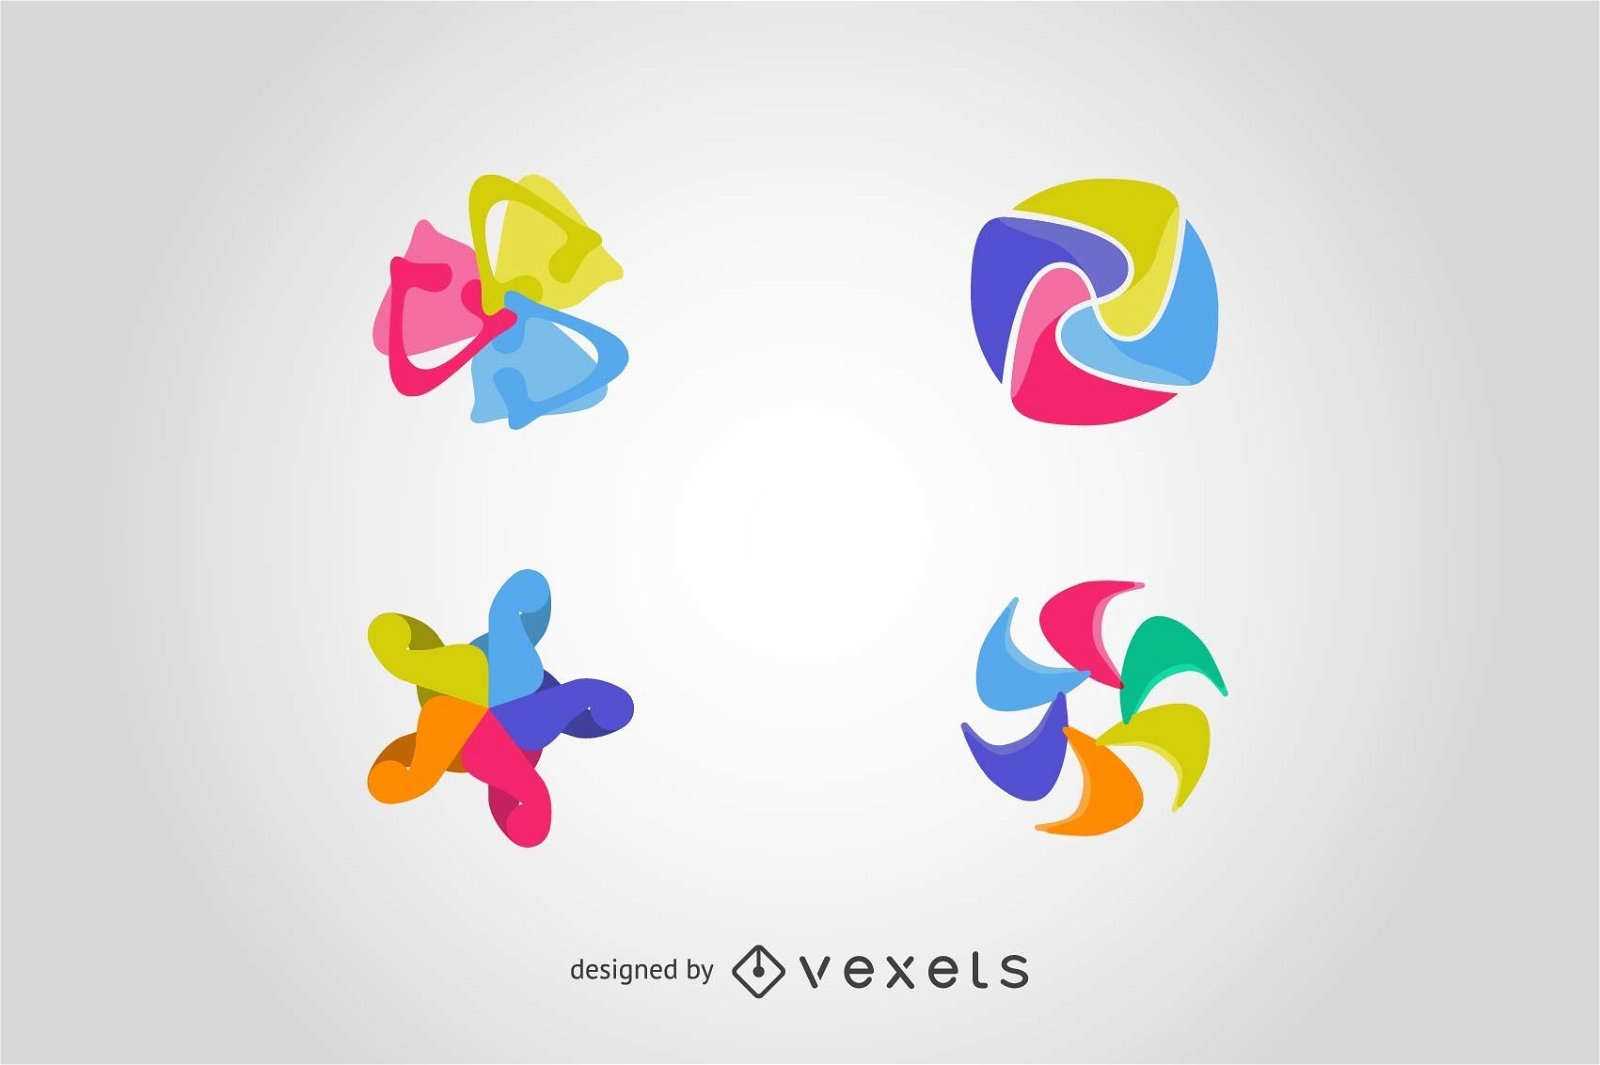 Set logo elements in abstract shapes